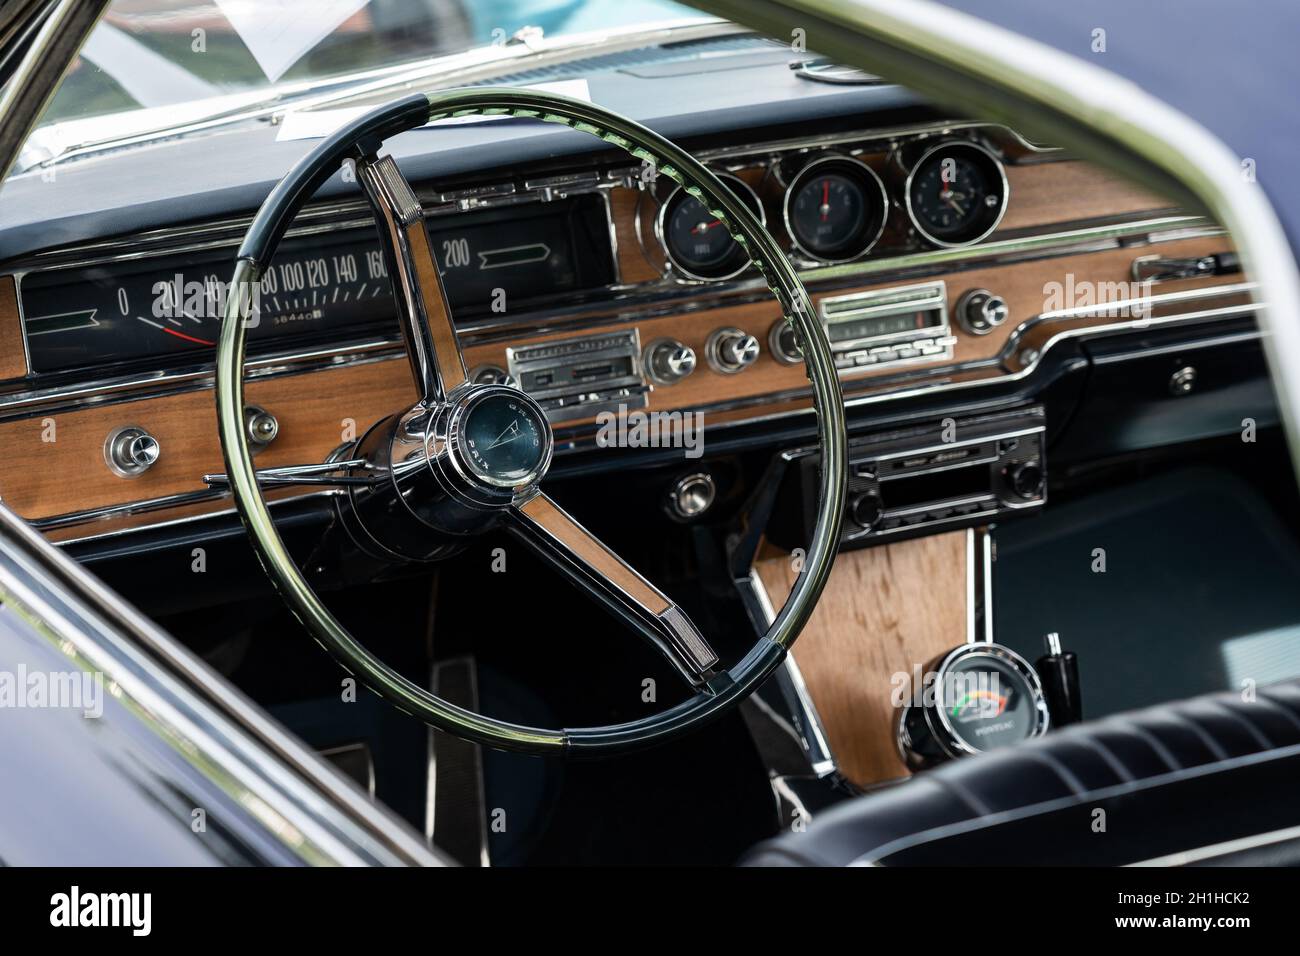 DIEDERSDORF, GERMANY - AUGUST 30, 2020: The interior of the personal luxury car Pontiac Grand Prix, 1965. The exhibition of 'US Car Classics'. Stock Photo